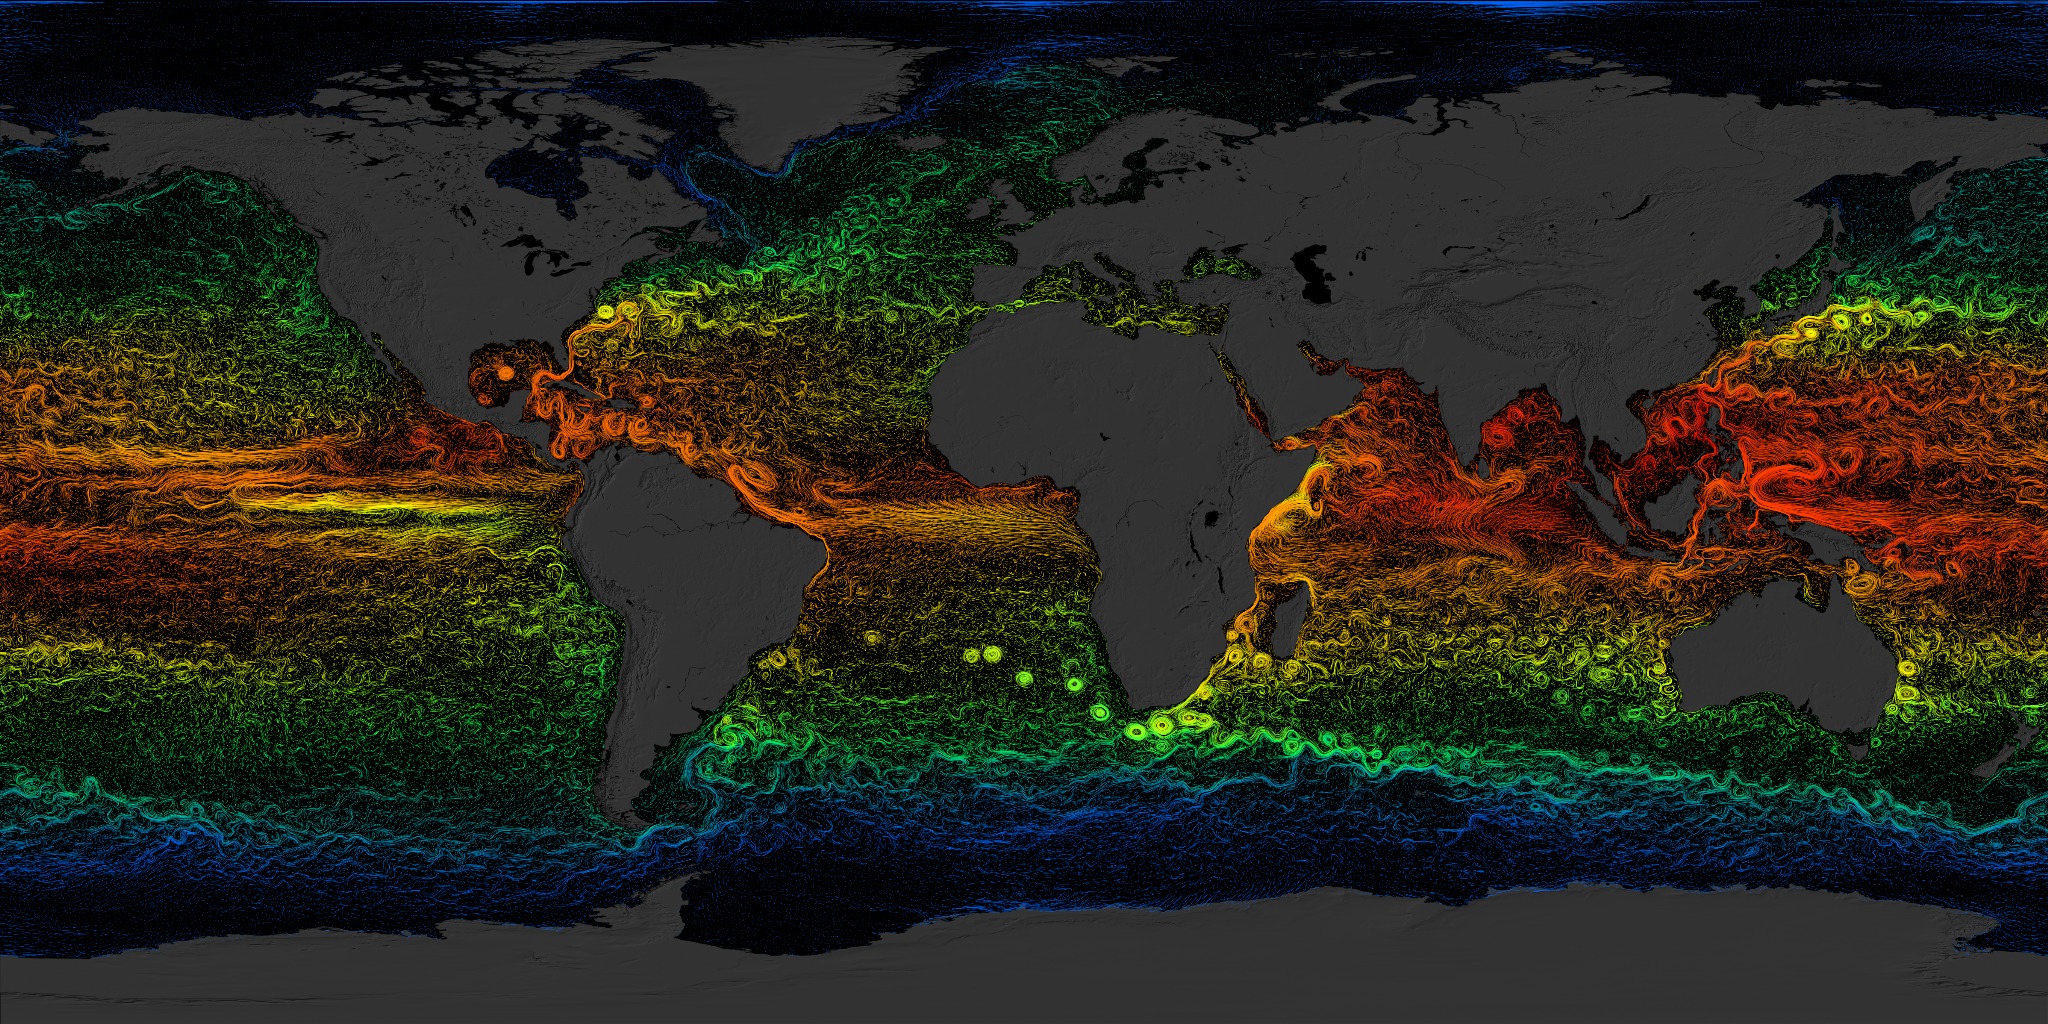 Global sea surface currents colored by temperature.  These are the assembled (contiguous) versions of the animation.  There are several resolutions to choose from, some are cropped for various purposes.  The 6840x3420 version is the complete, full resolution visualization at the appropriate 2x1 aspect ratio and has not been cropped or resized.  The time range for these visualizations is from 2007-03-25T12:00Z to 2008-03-03T12:00Z.